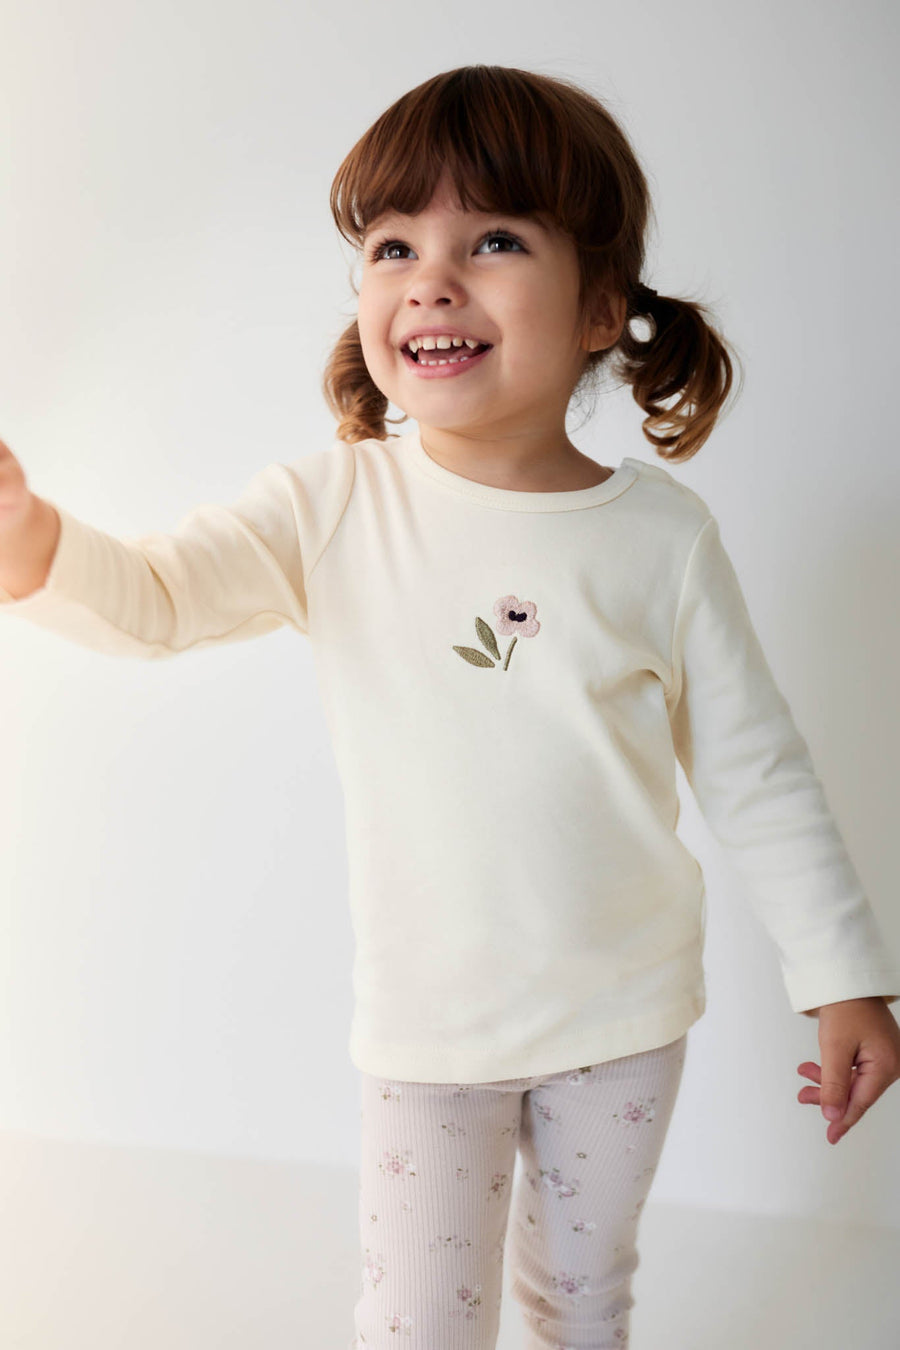 Pima Cotton Long Sleeve Top - Parchment Petite Goldie Childrens Top from Jamie Kay USA